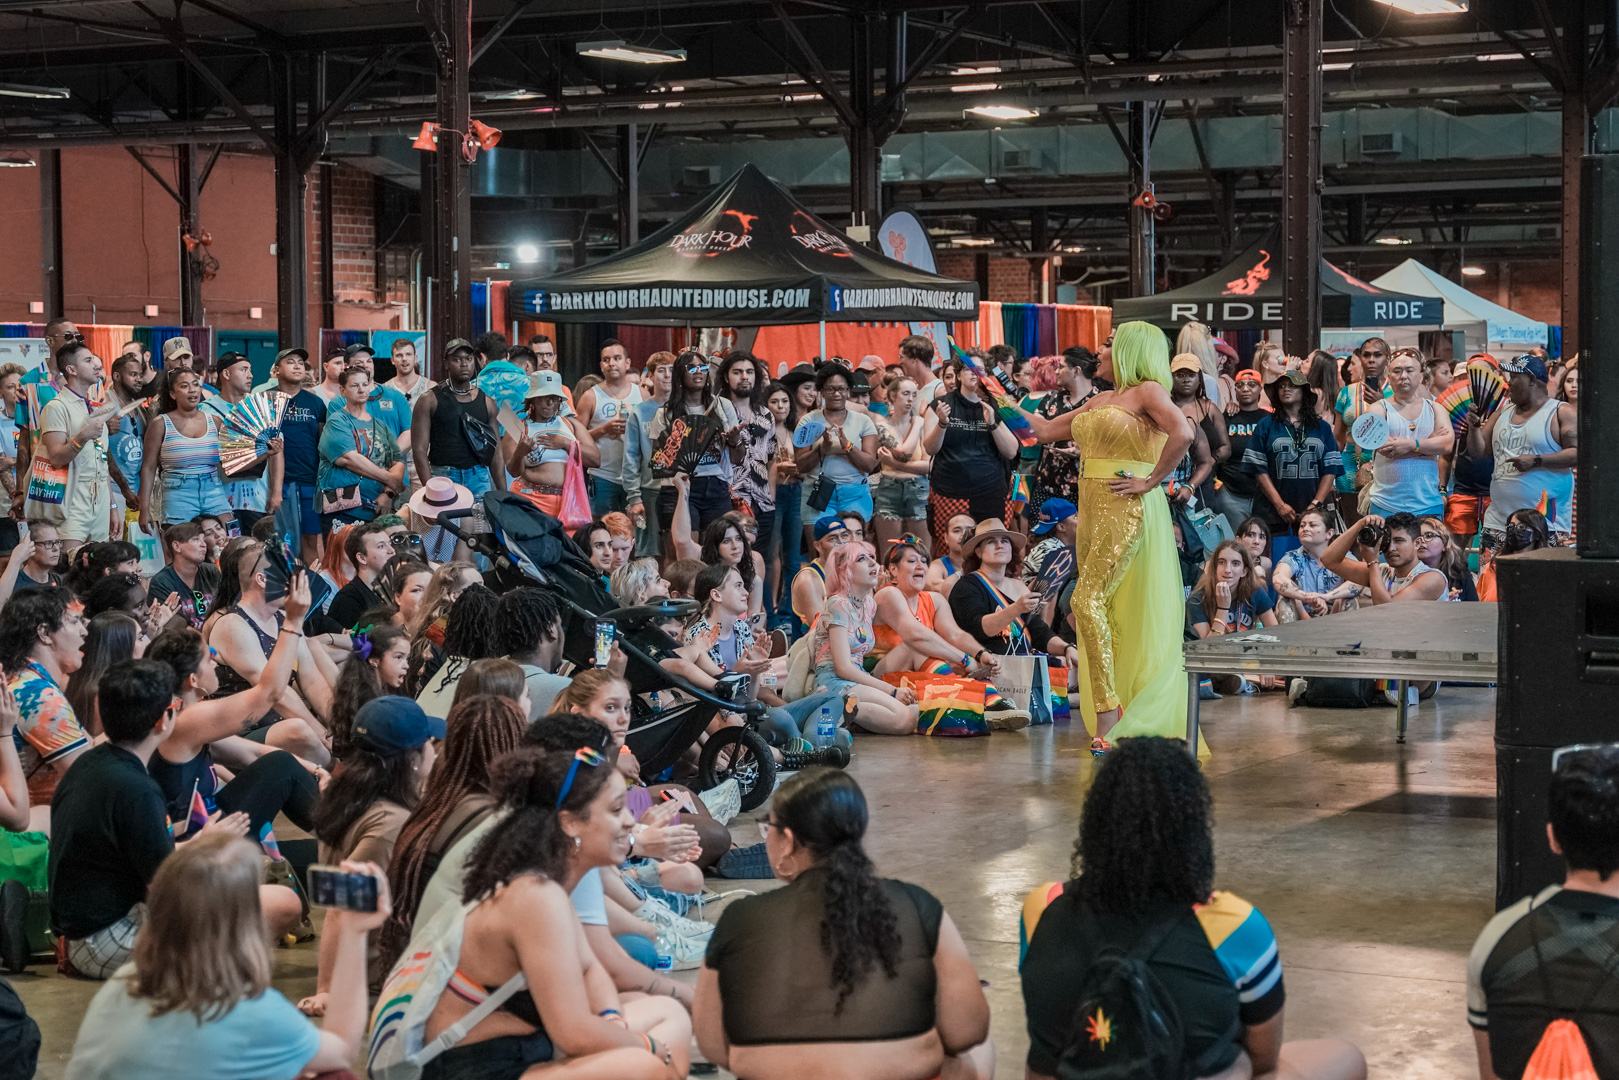 A performer in drag in front od a large seated crowd